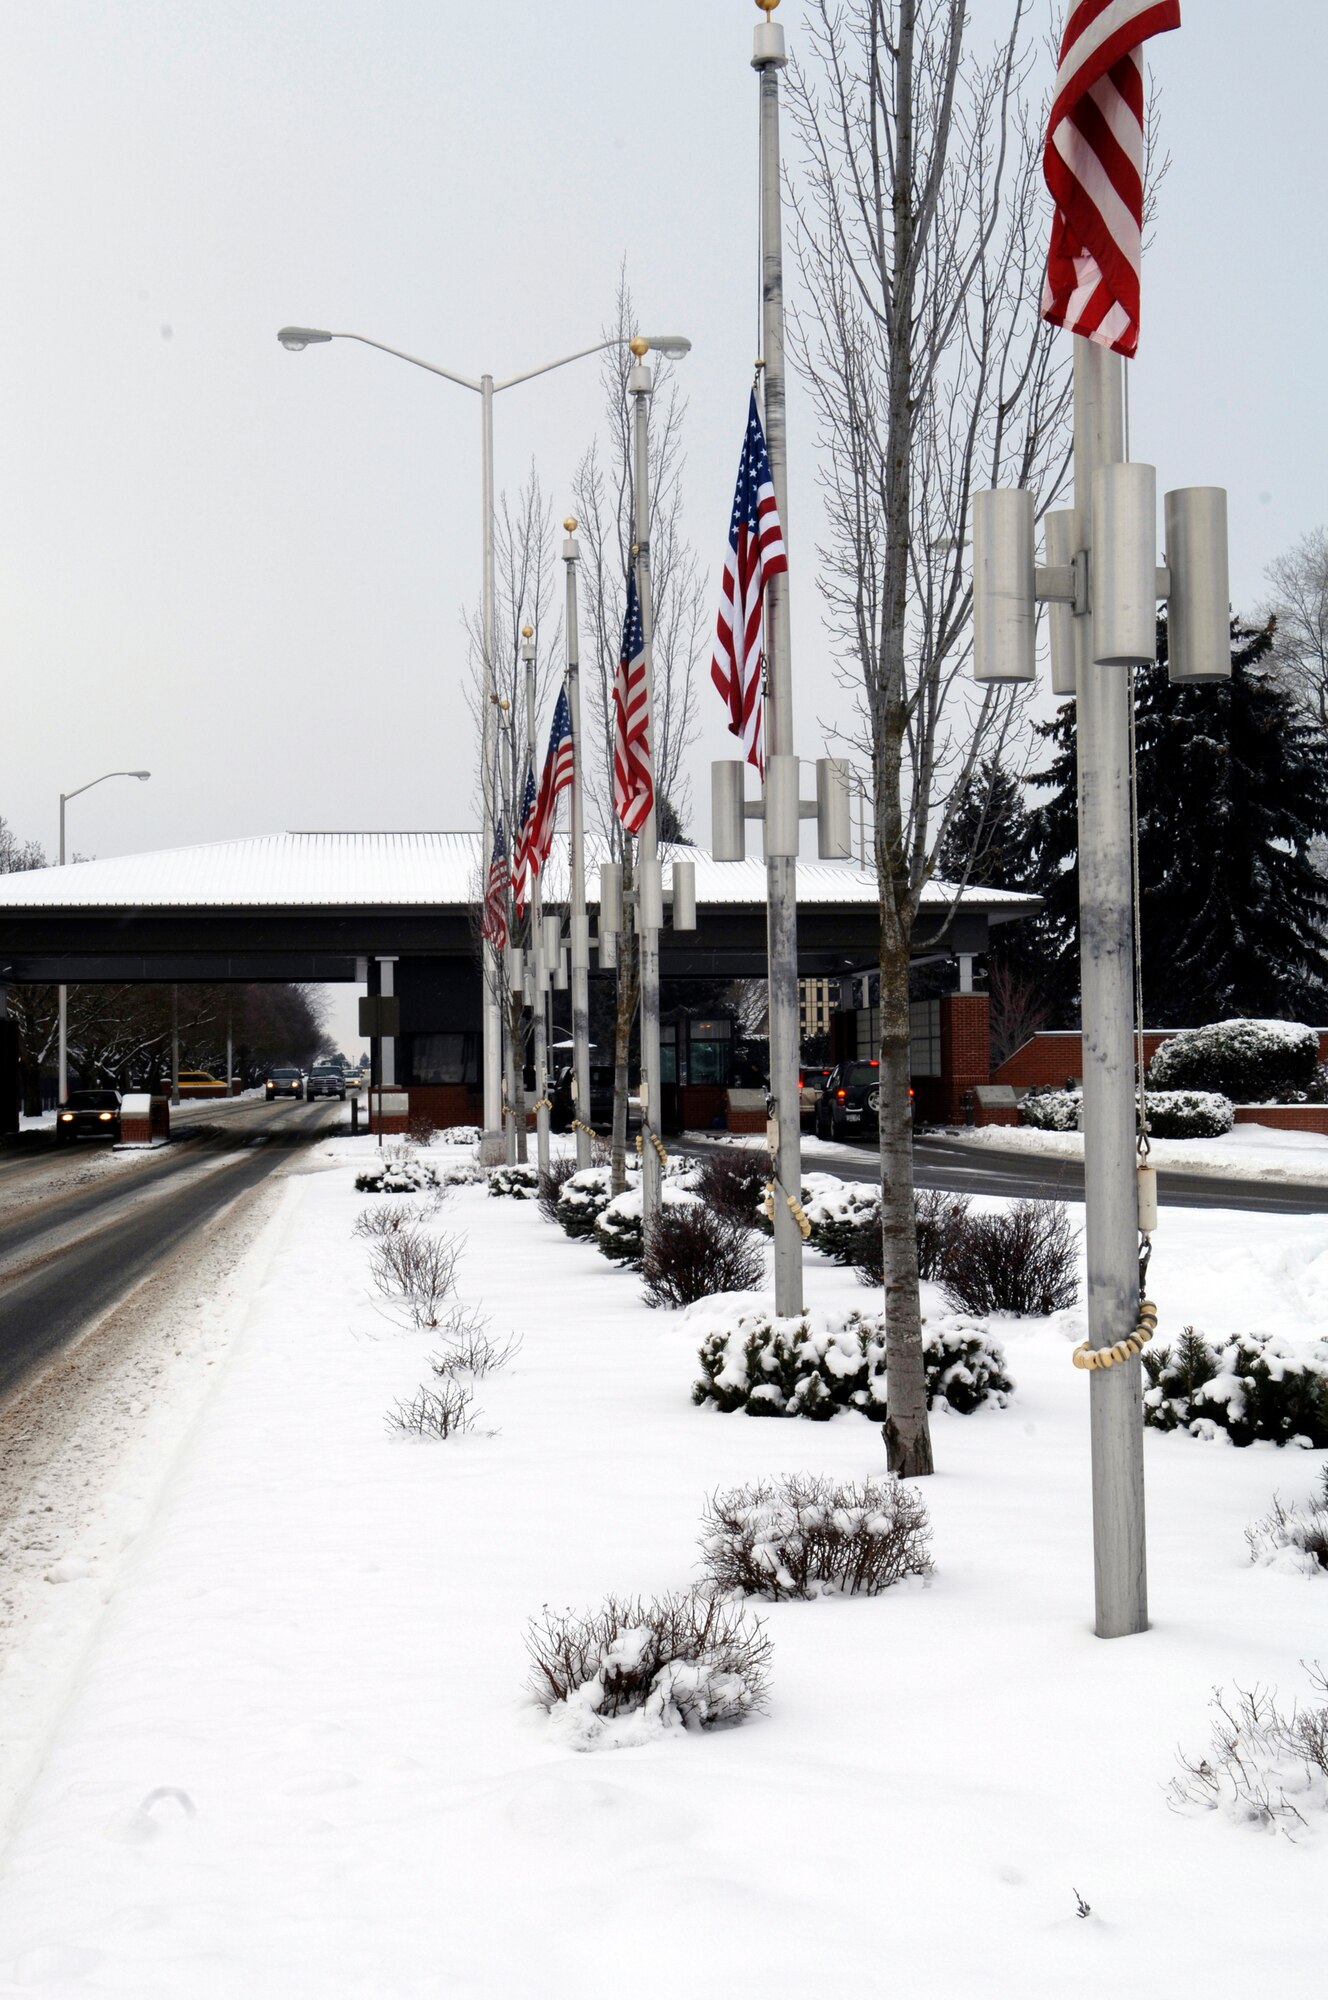 American flags offer a warm welcome and farewell as people enter and exit the base. Over the past week, Fairchild has received a layer of snow that has blanketed the entire base in white.